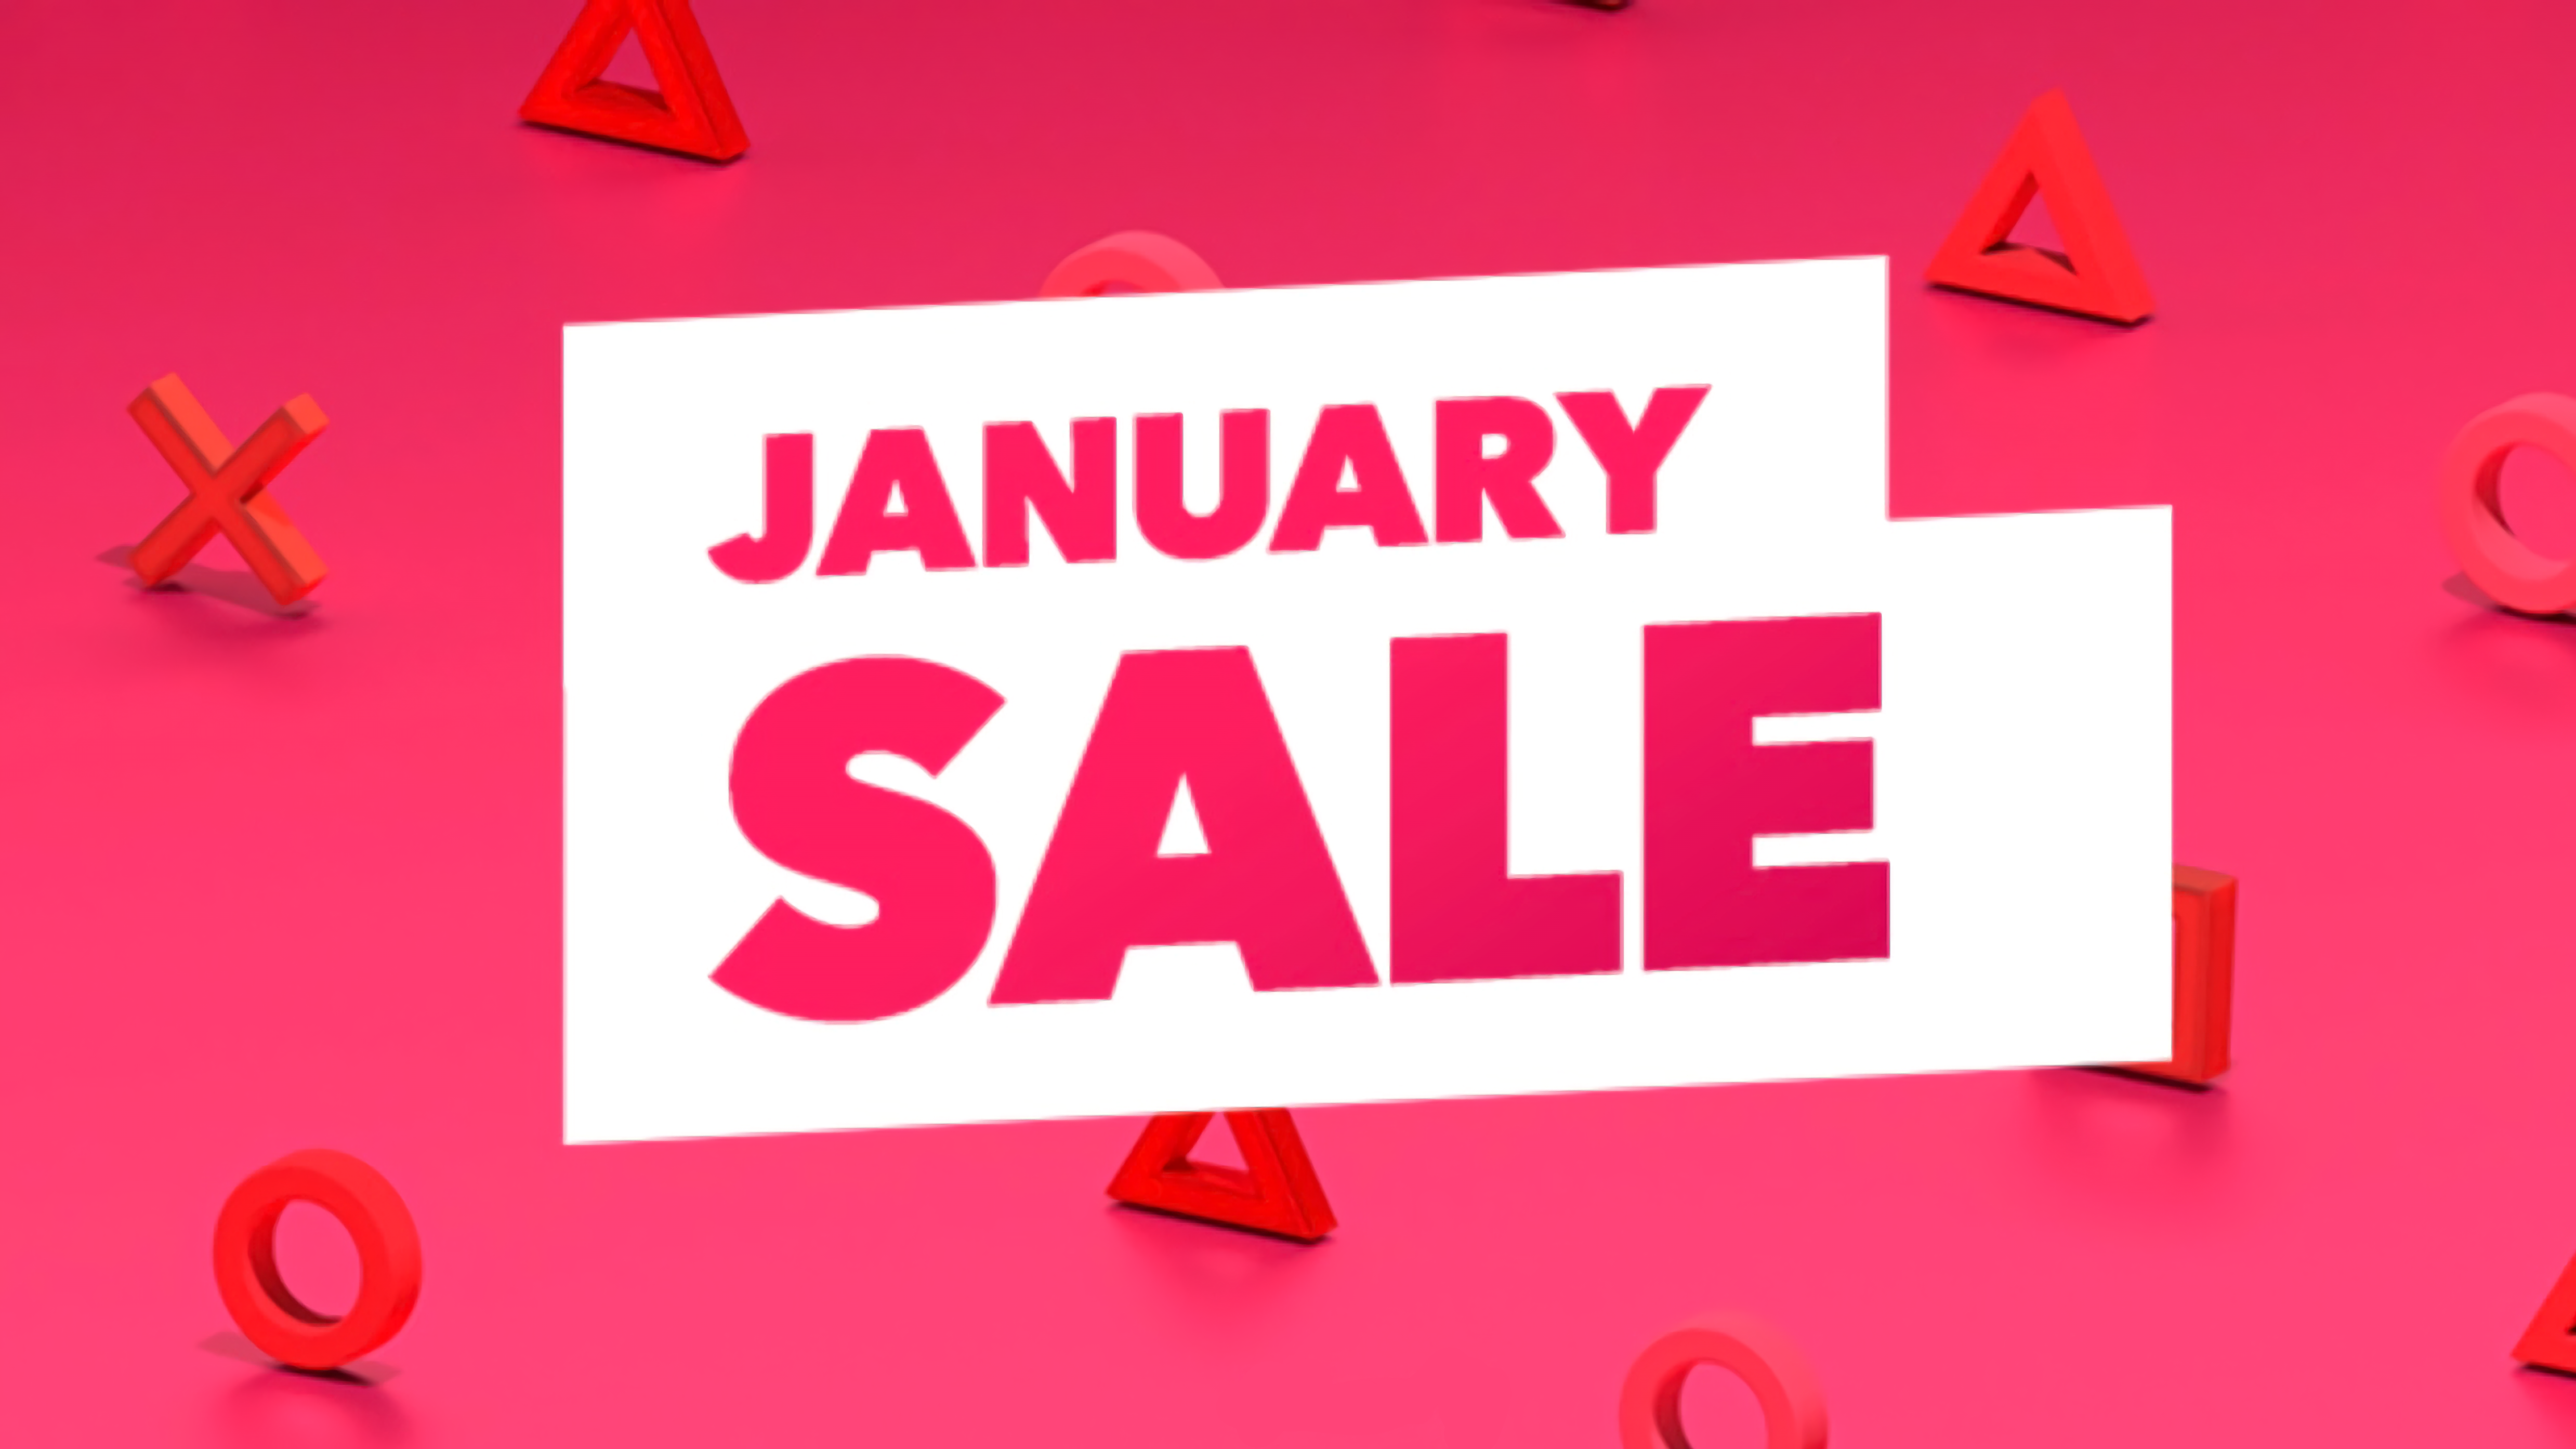 The january sales started and. PLAYSTATION Summer sale.